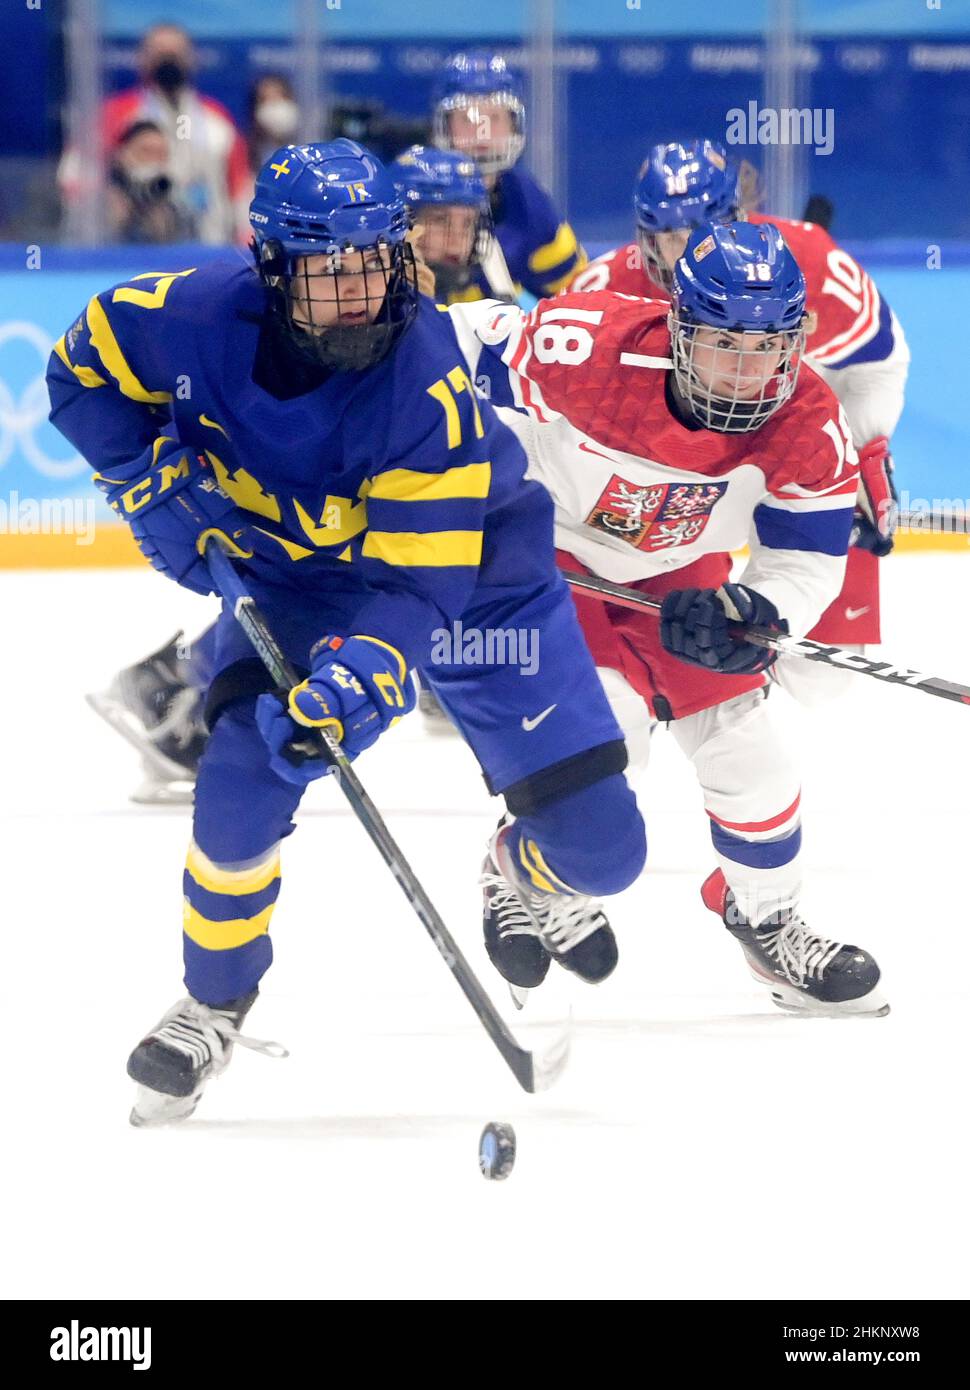 Beijing, China. 5th Feb, 2022. Sofie Lundin (L) of Sweden competes during the women's ice hockey preliminary round Group B match between the Czech Republic and Sweden at the National Indoor Stadium in Beijing, China, Feb. 5, 2022. Credit: Li An/Xinhua/Alamy Live News Stock Photo